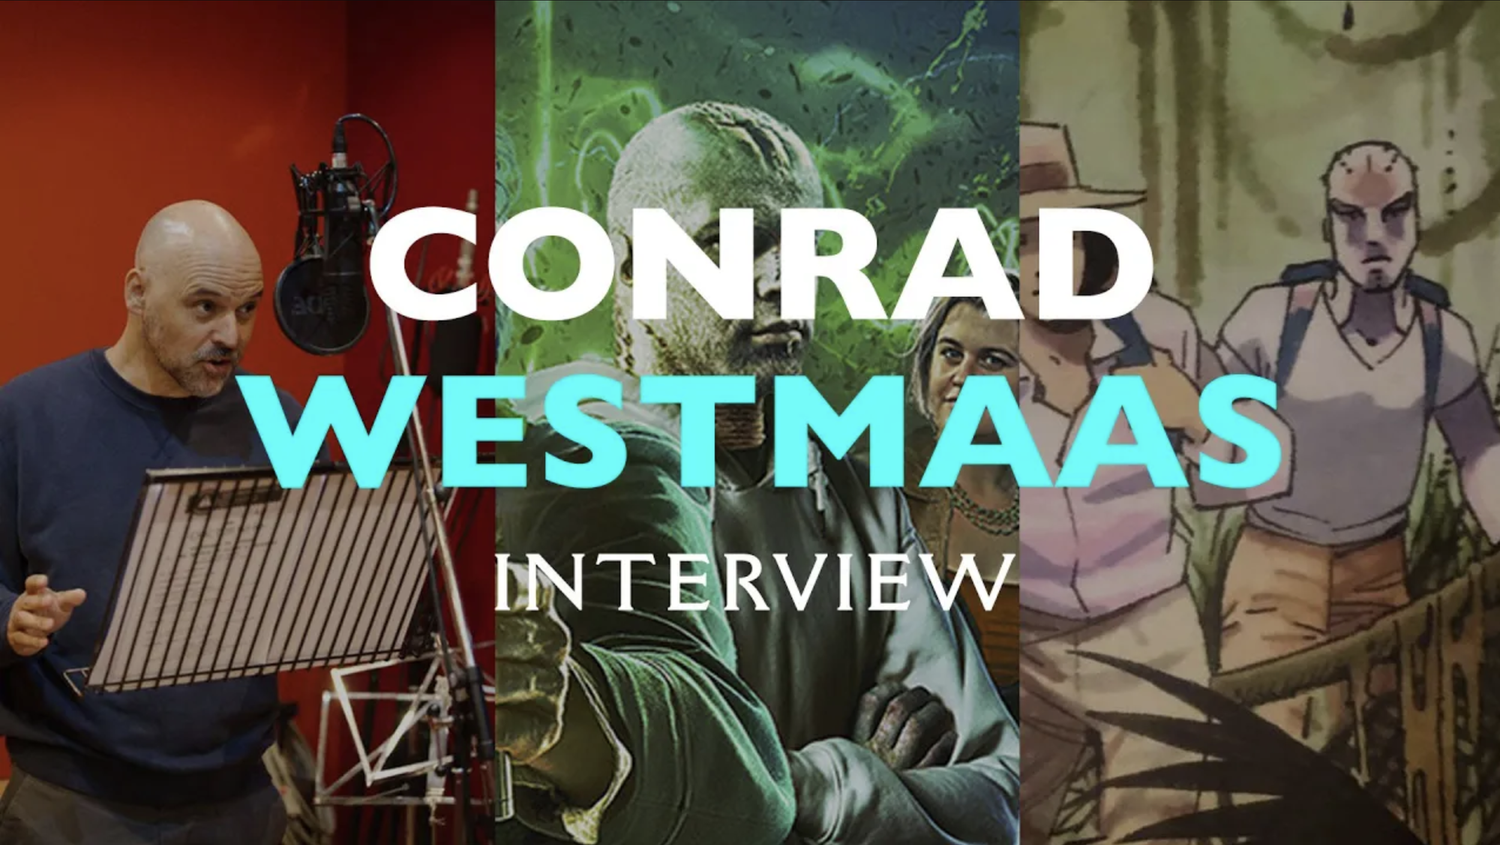 Interview with Conrad Westmaas from the BFI!